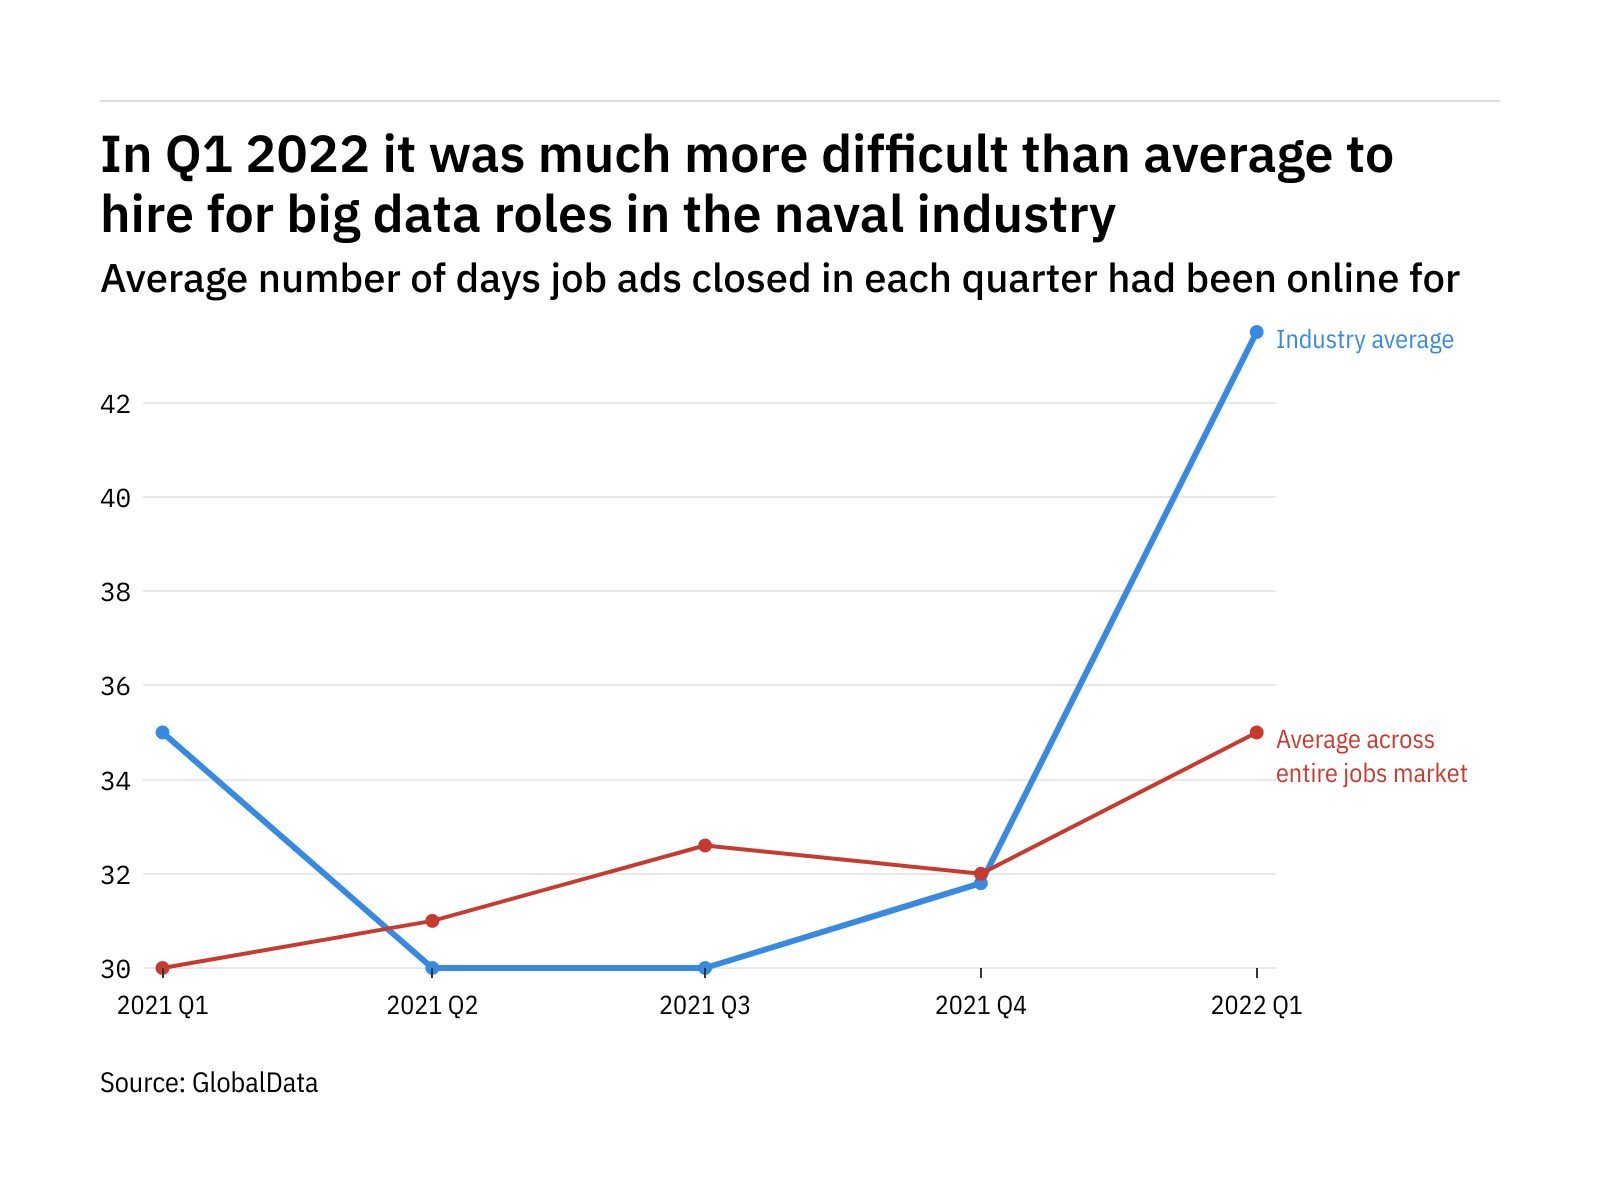 The naval industry found it harder to fill big data vacancies in Q1 2022